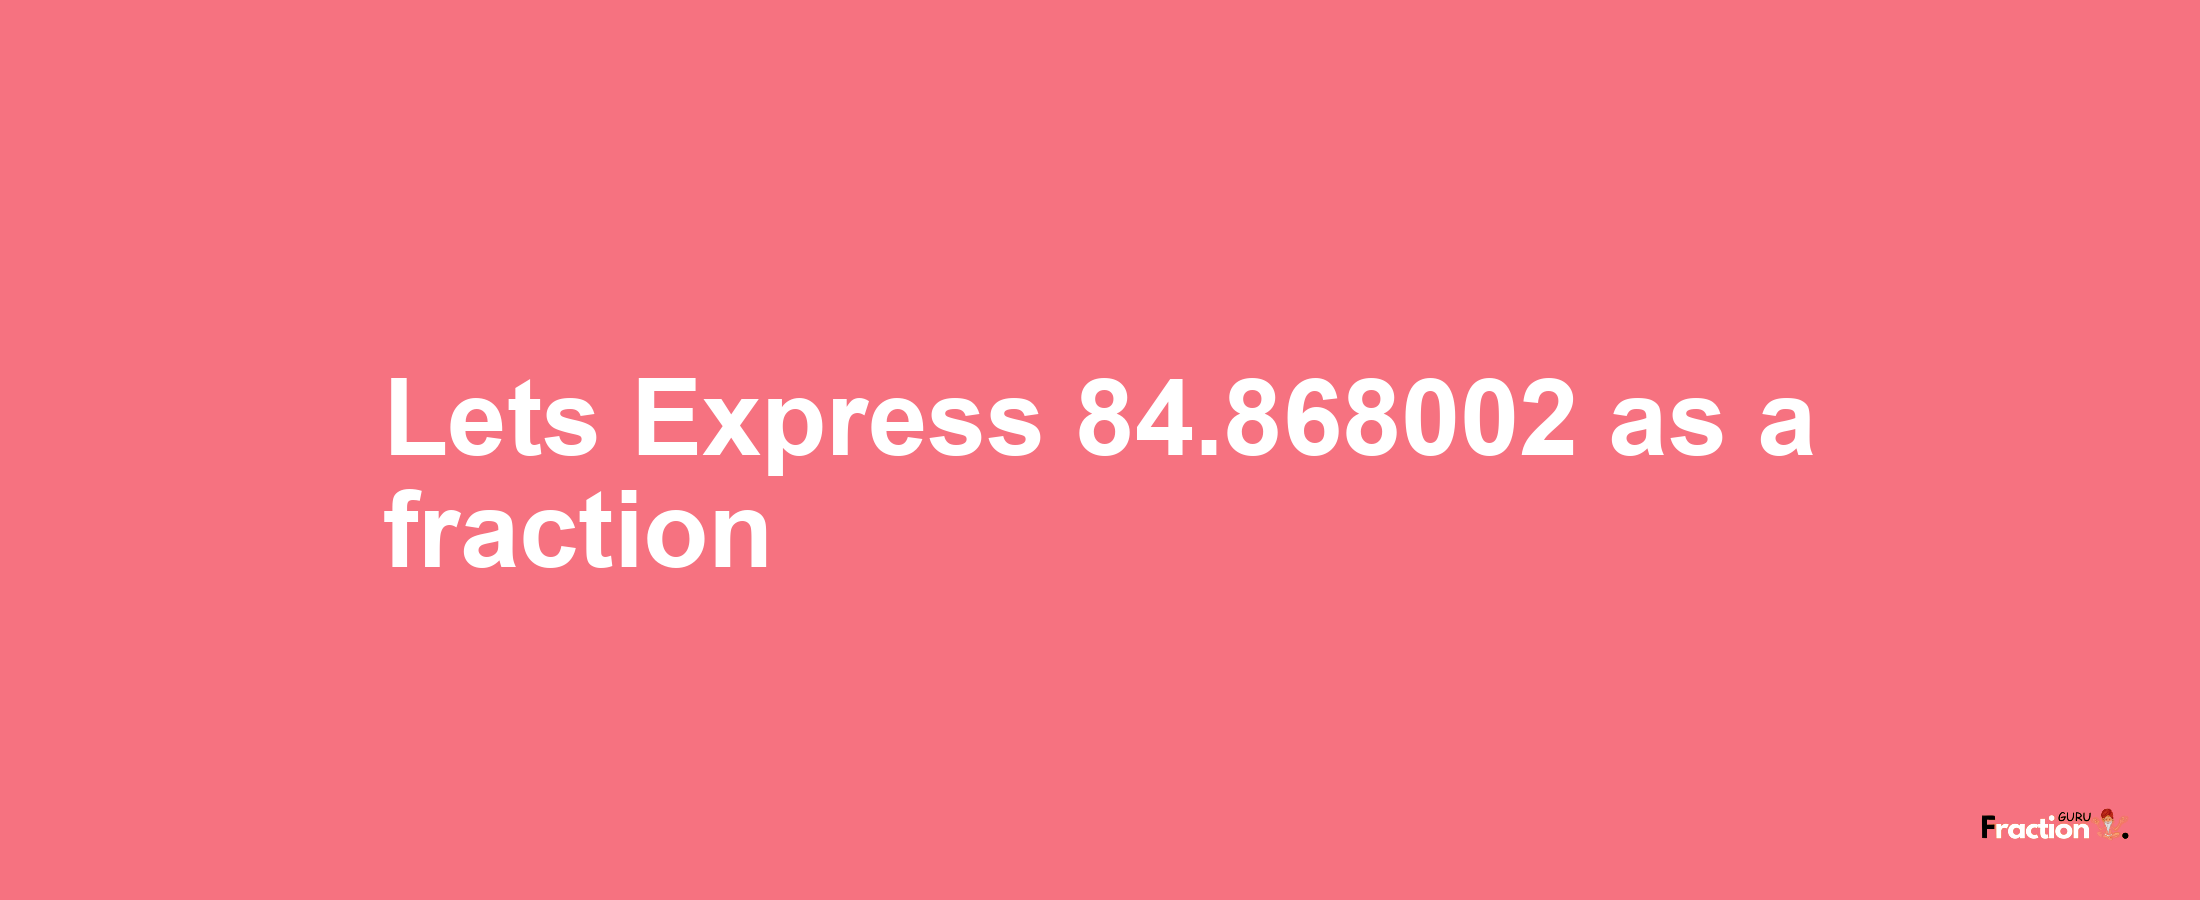 Lets Express 84.868002 as afraction